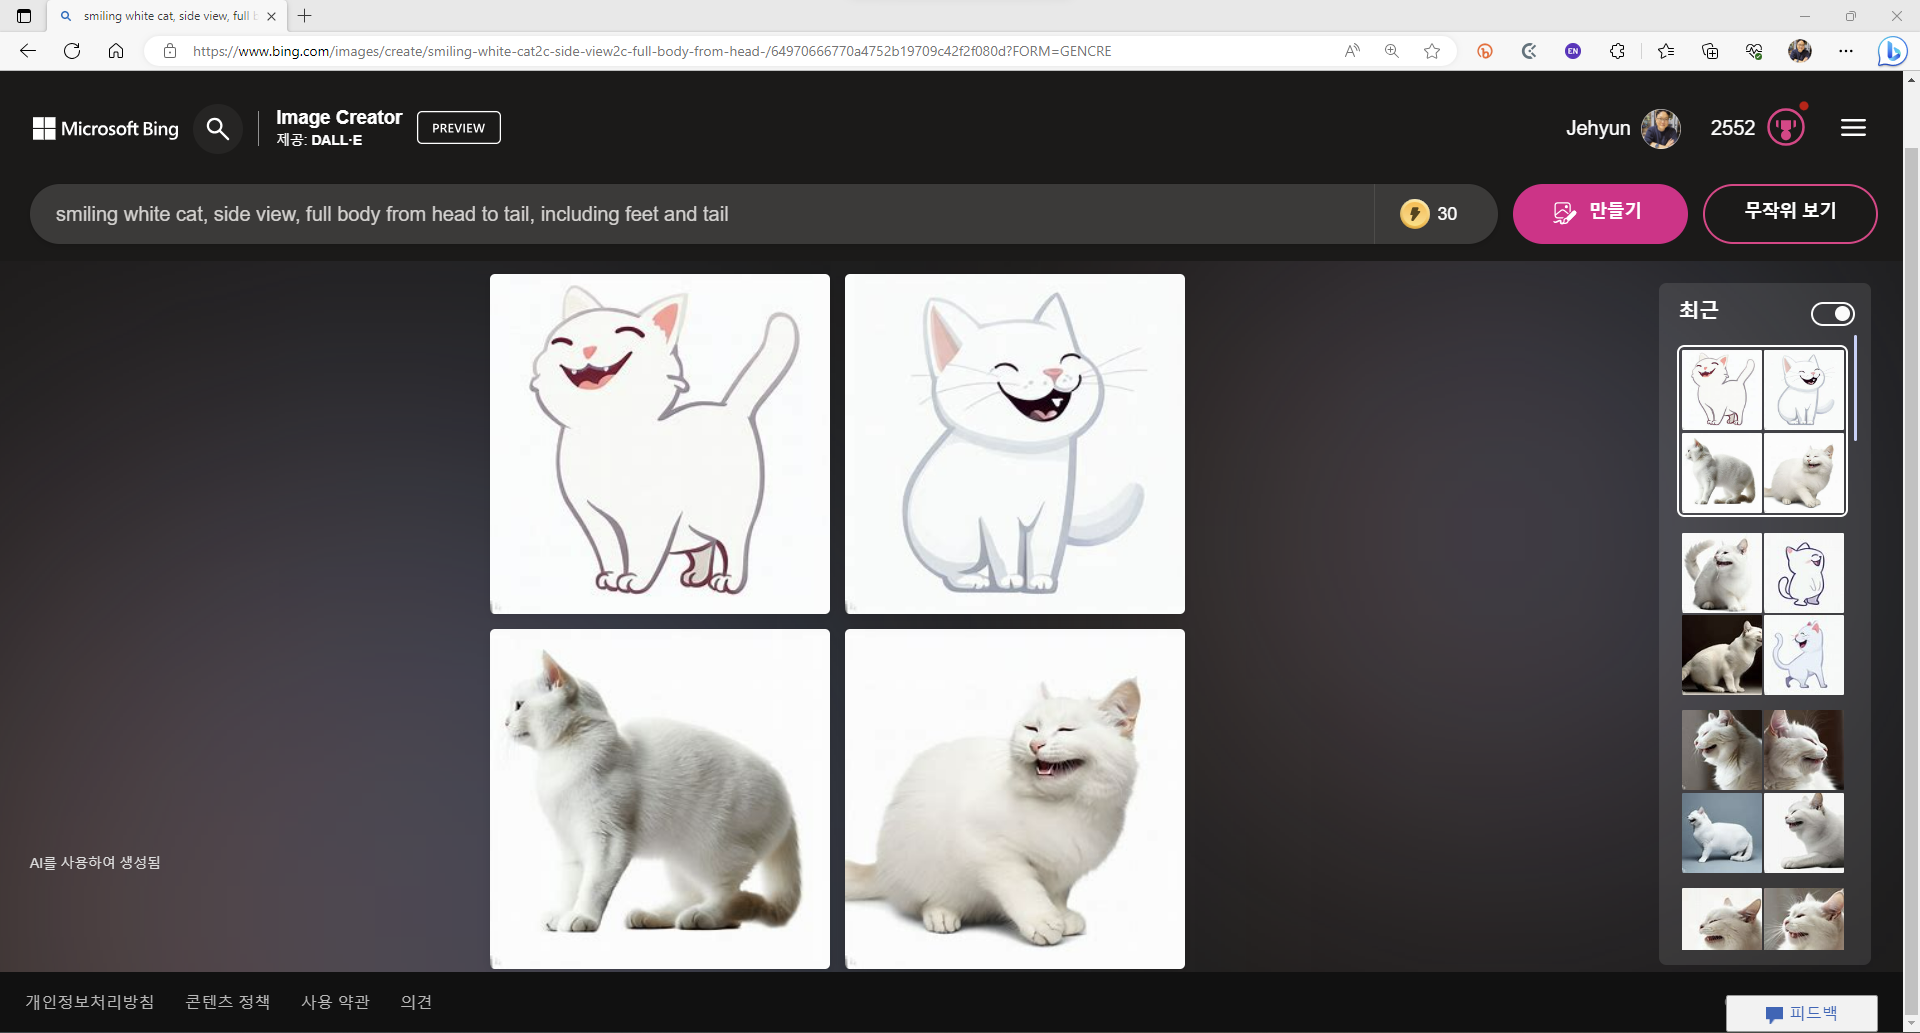 "smiling white cat, side view, full body including feet and tail"